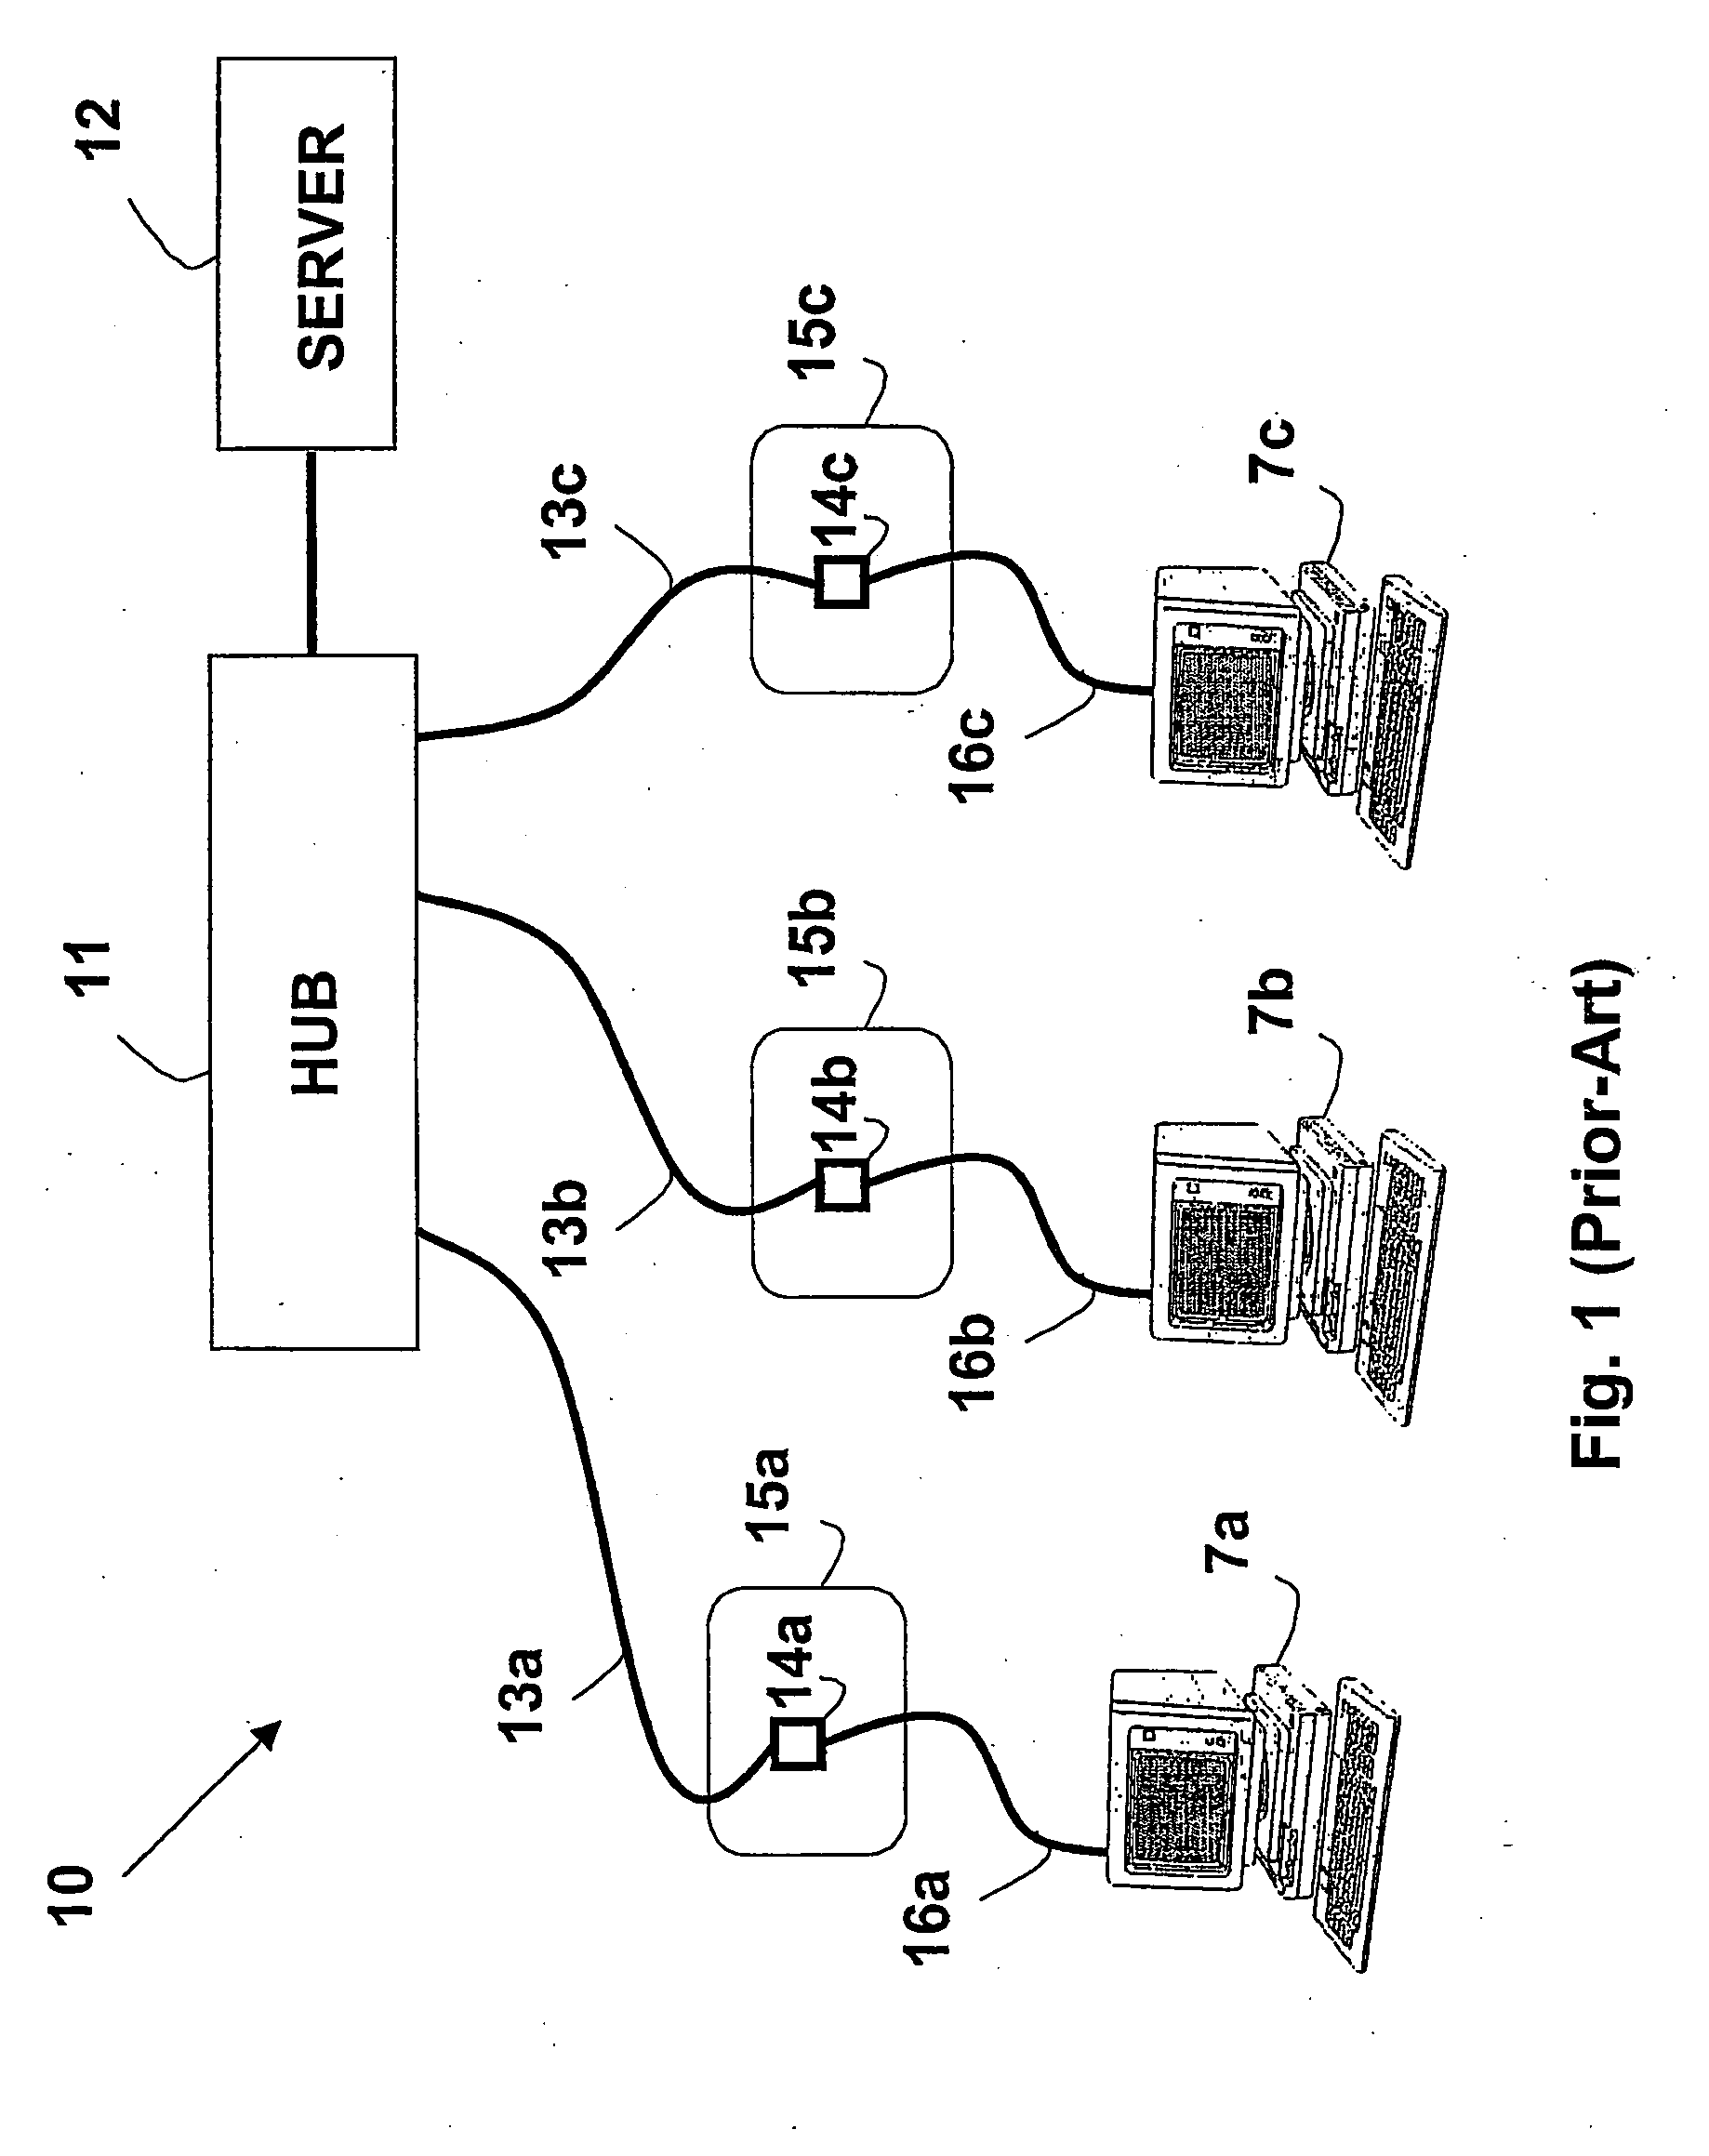 Outlet with analog signal adapter, a method for use thereof and a network using said outlet